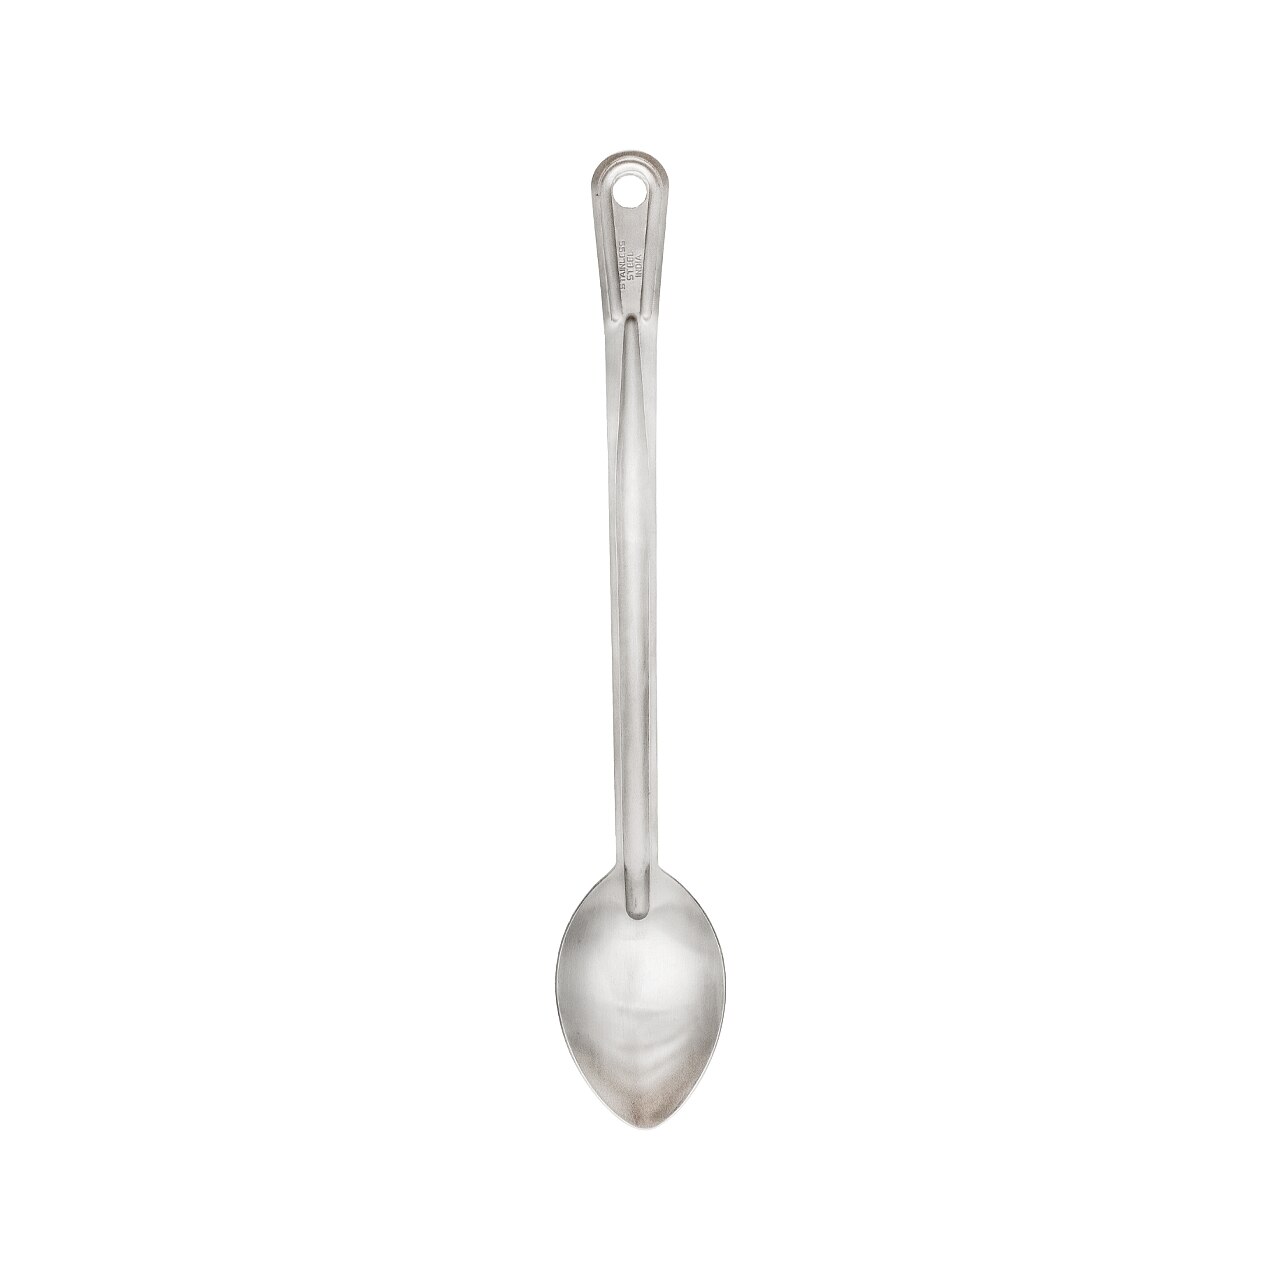 15&quot;L Renaissance Basting
Spoon, (38.1 cm), solid,
heavy duty, curved handle,
stainless steel, brushed
finish, each,  1/22